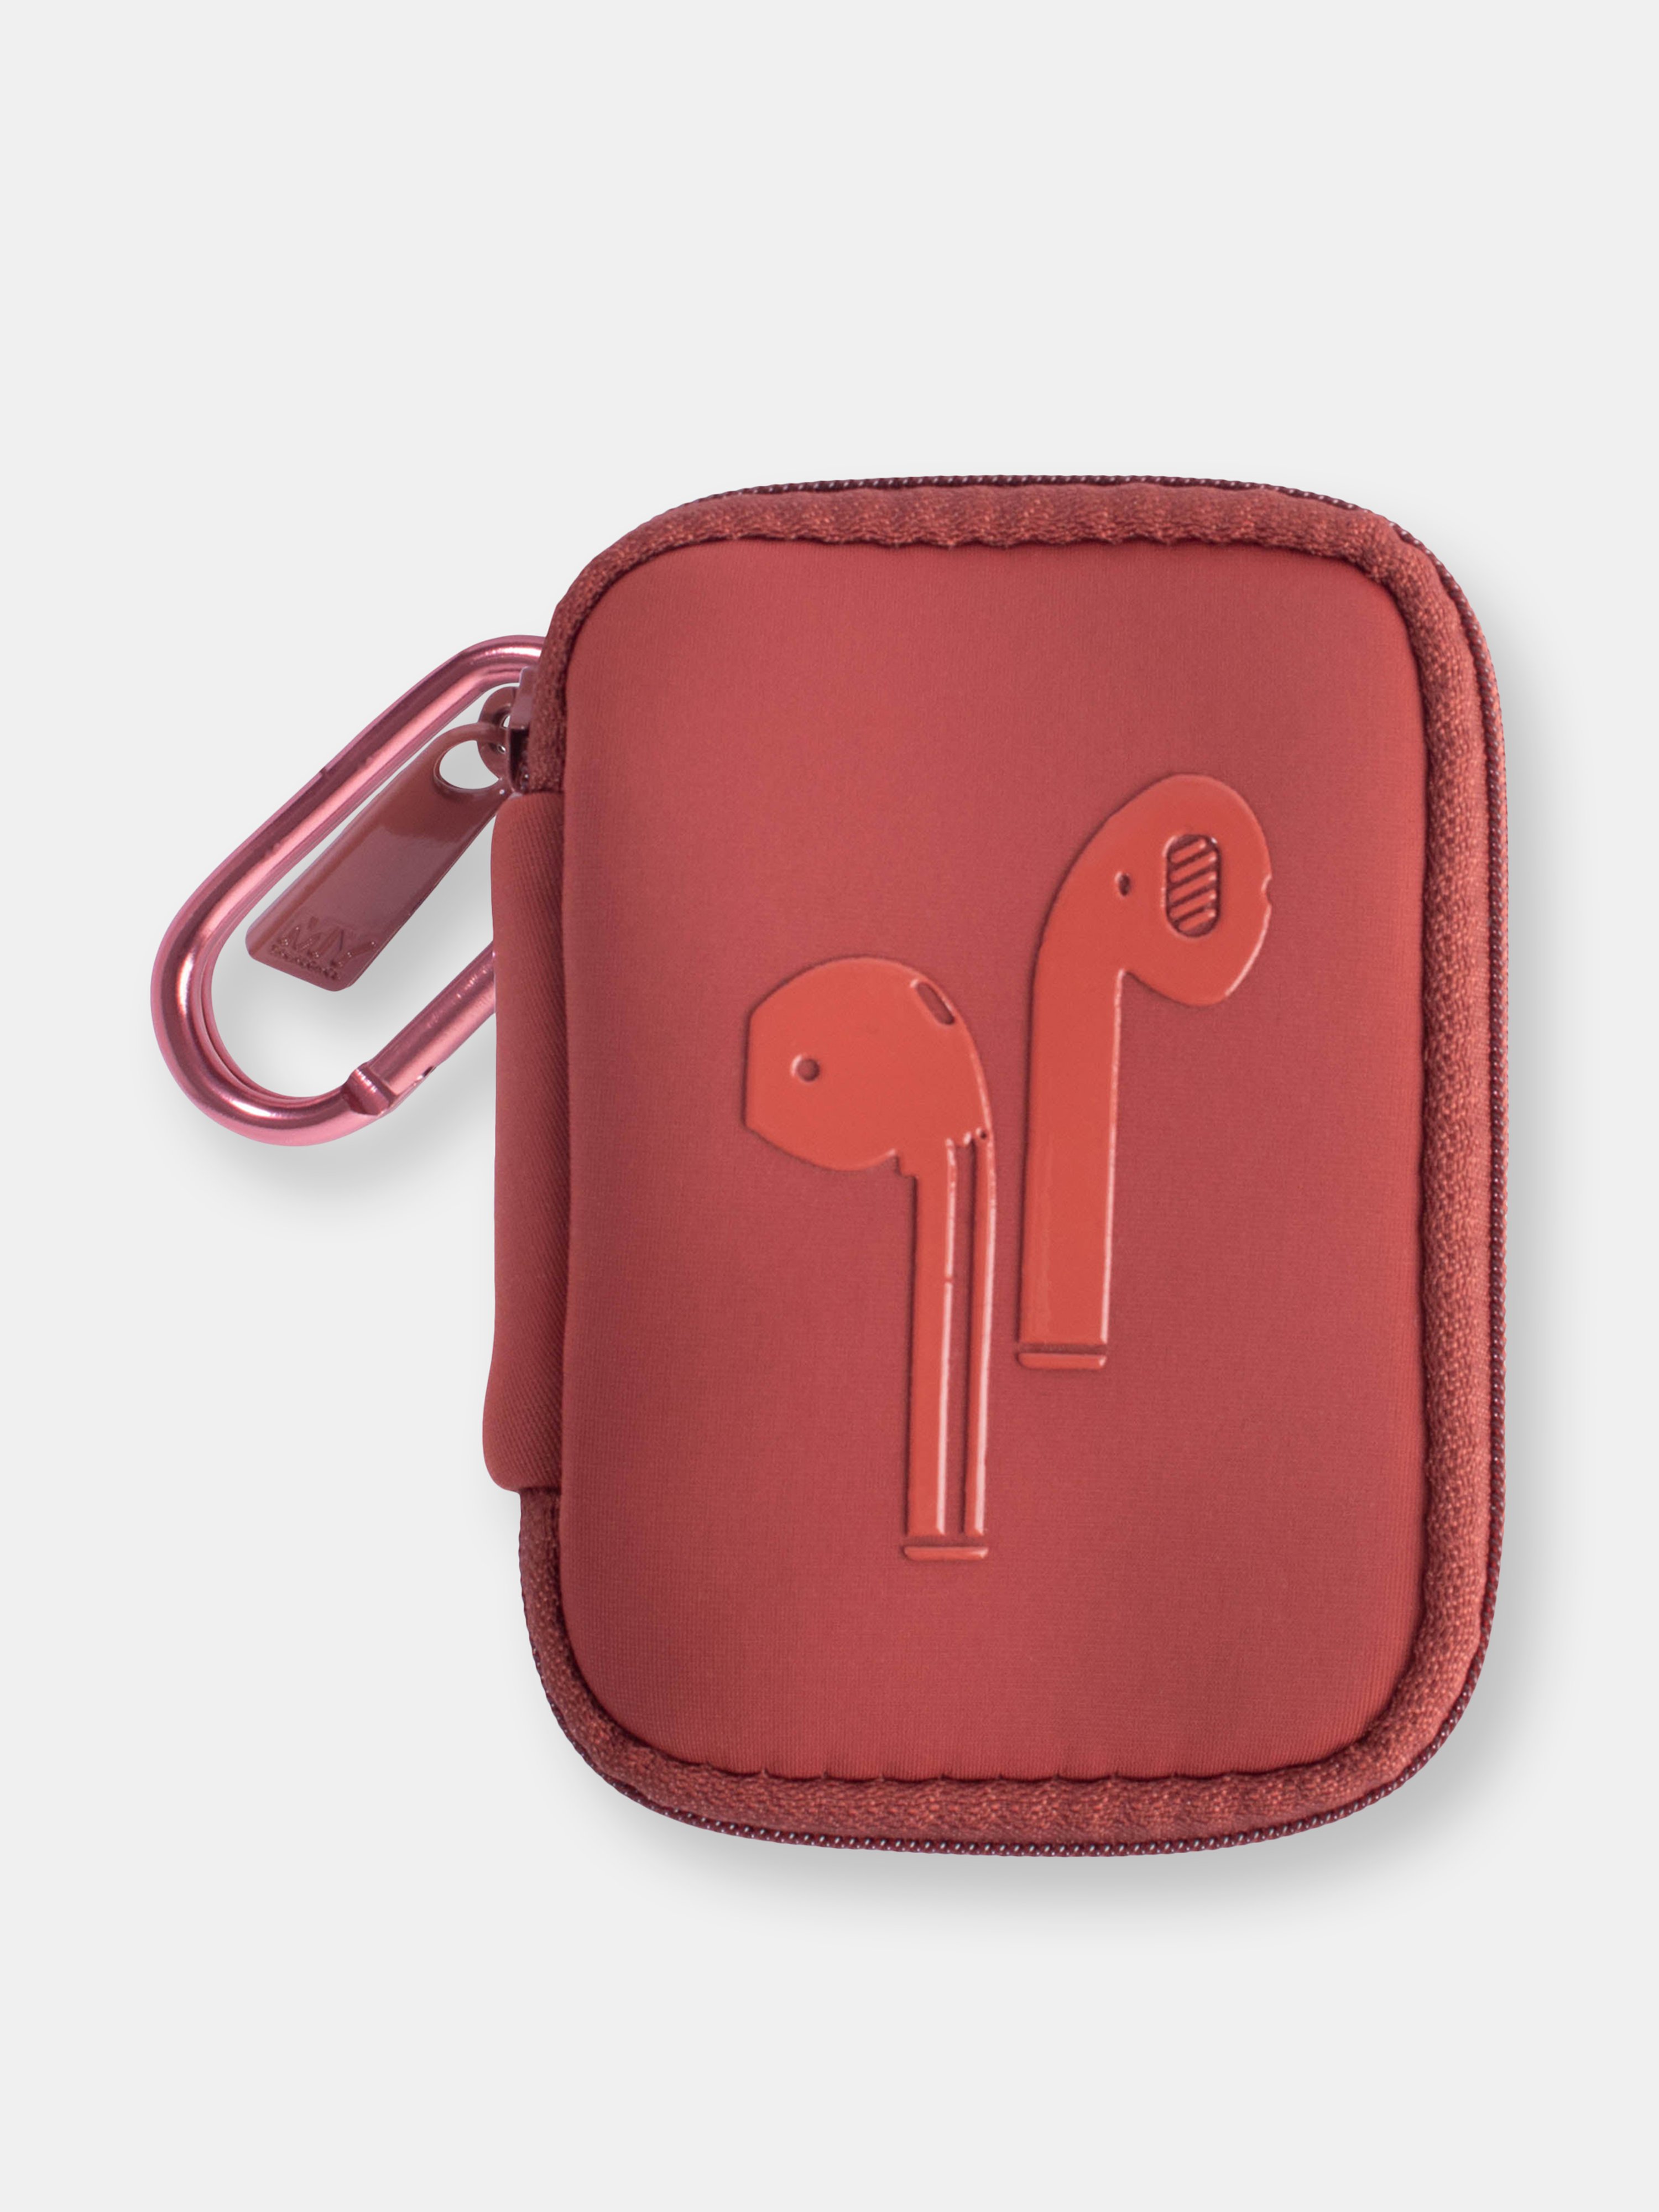 Mytagalongs Ear Bud Case With Carabiner In Brown